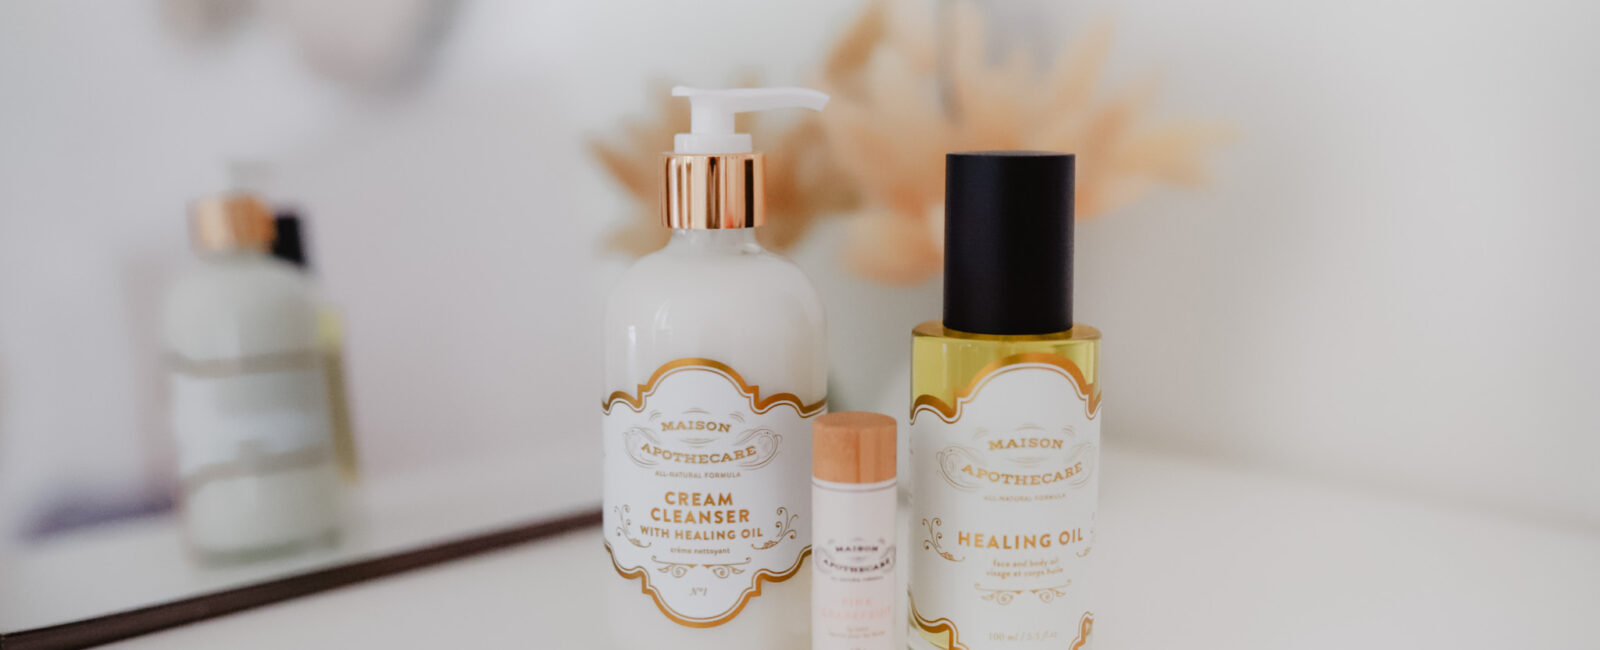 Up Your Winter Skincare Game with Maison Apothecare, Pure Plant Wellness